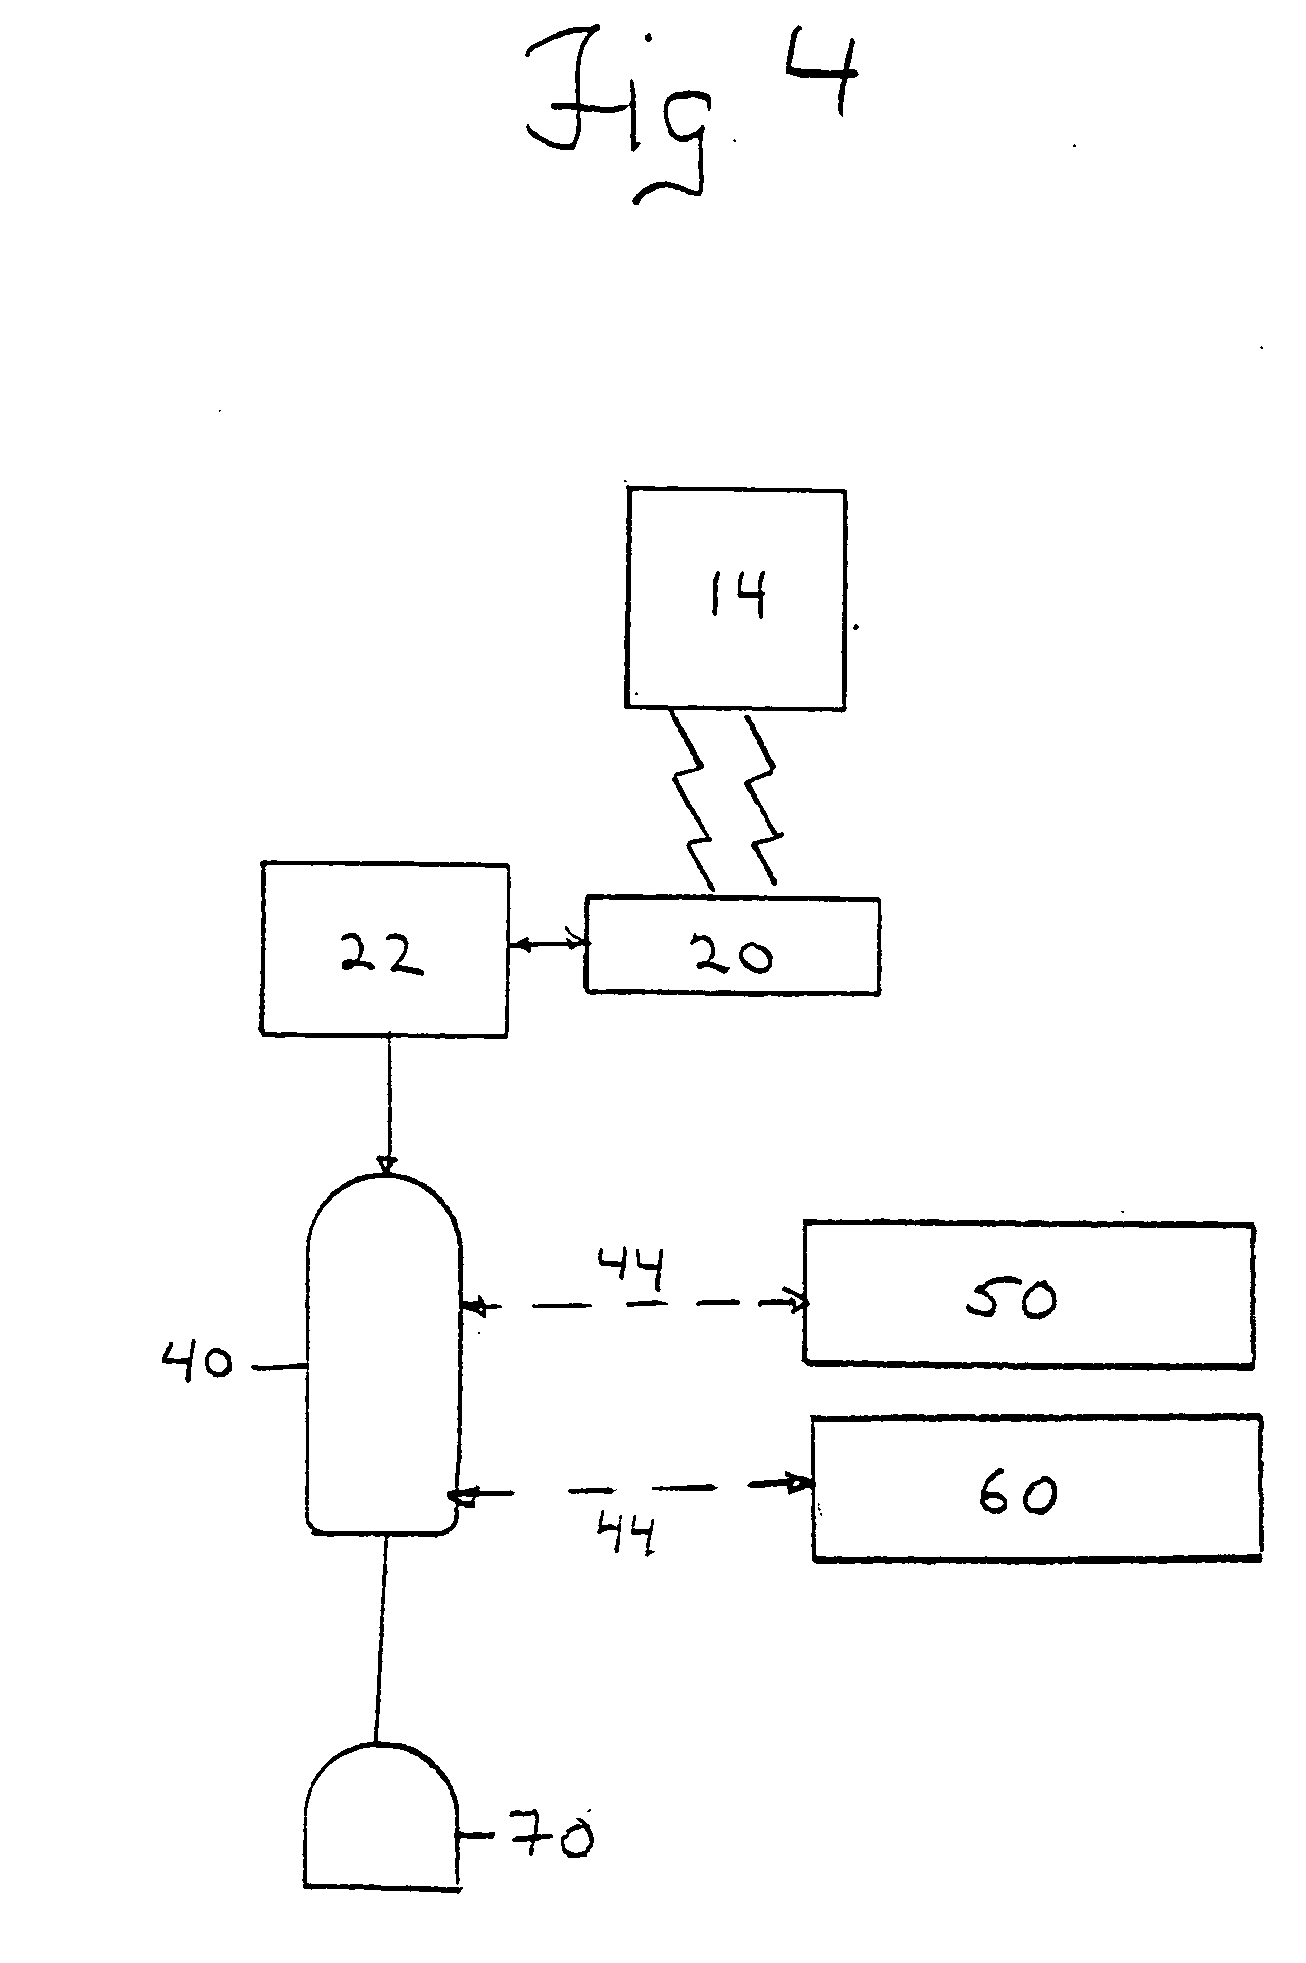 Medical implant device with RFID tag and method of identification of device